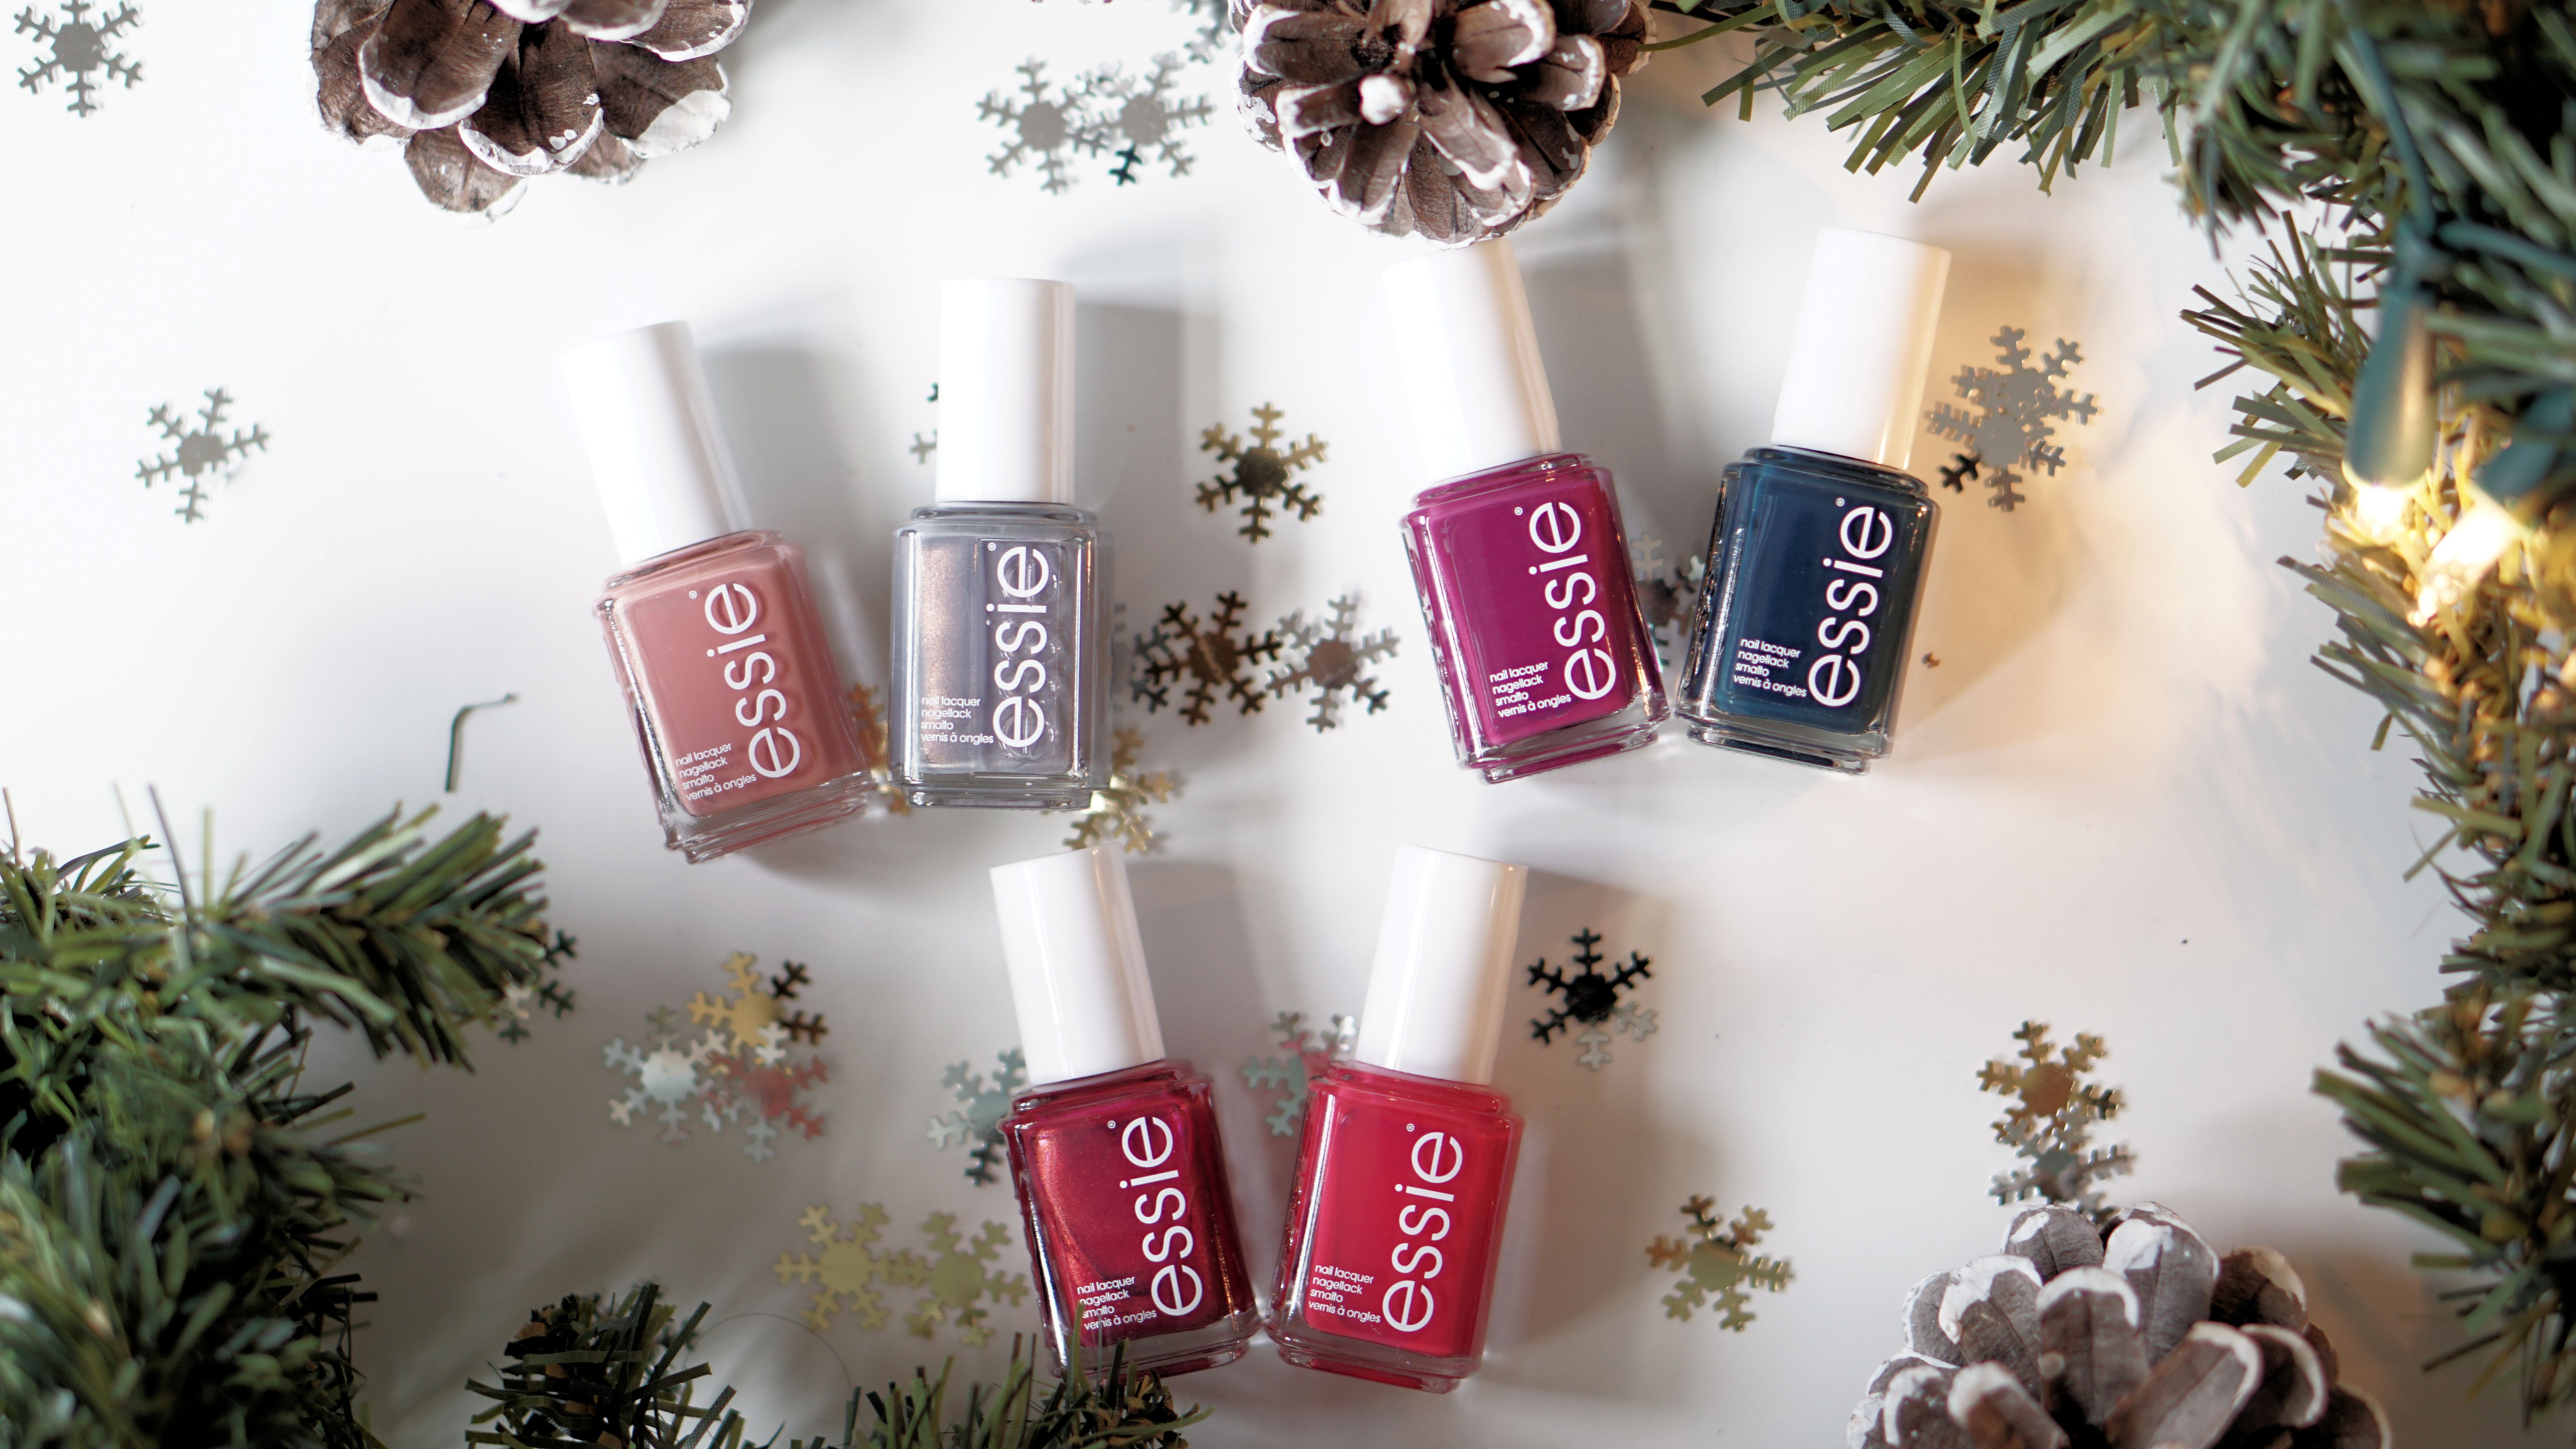 BRING IN THE BLING WITH ESSIE